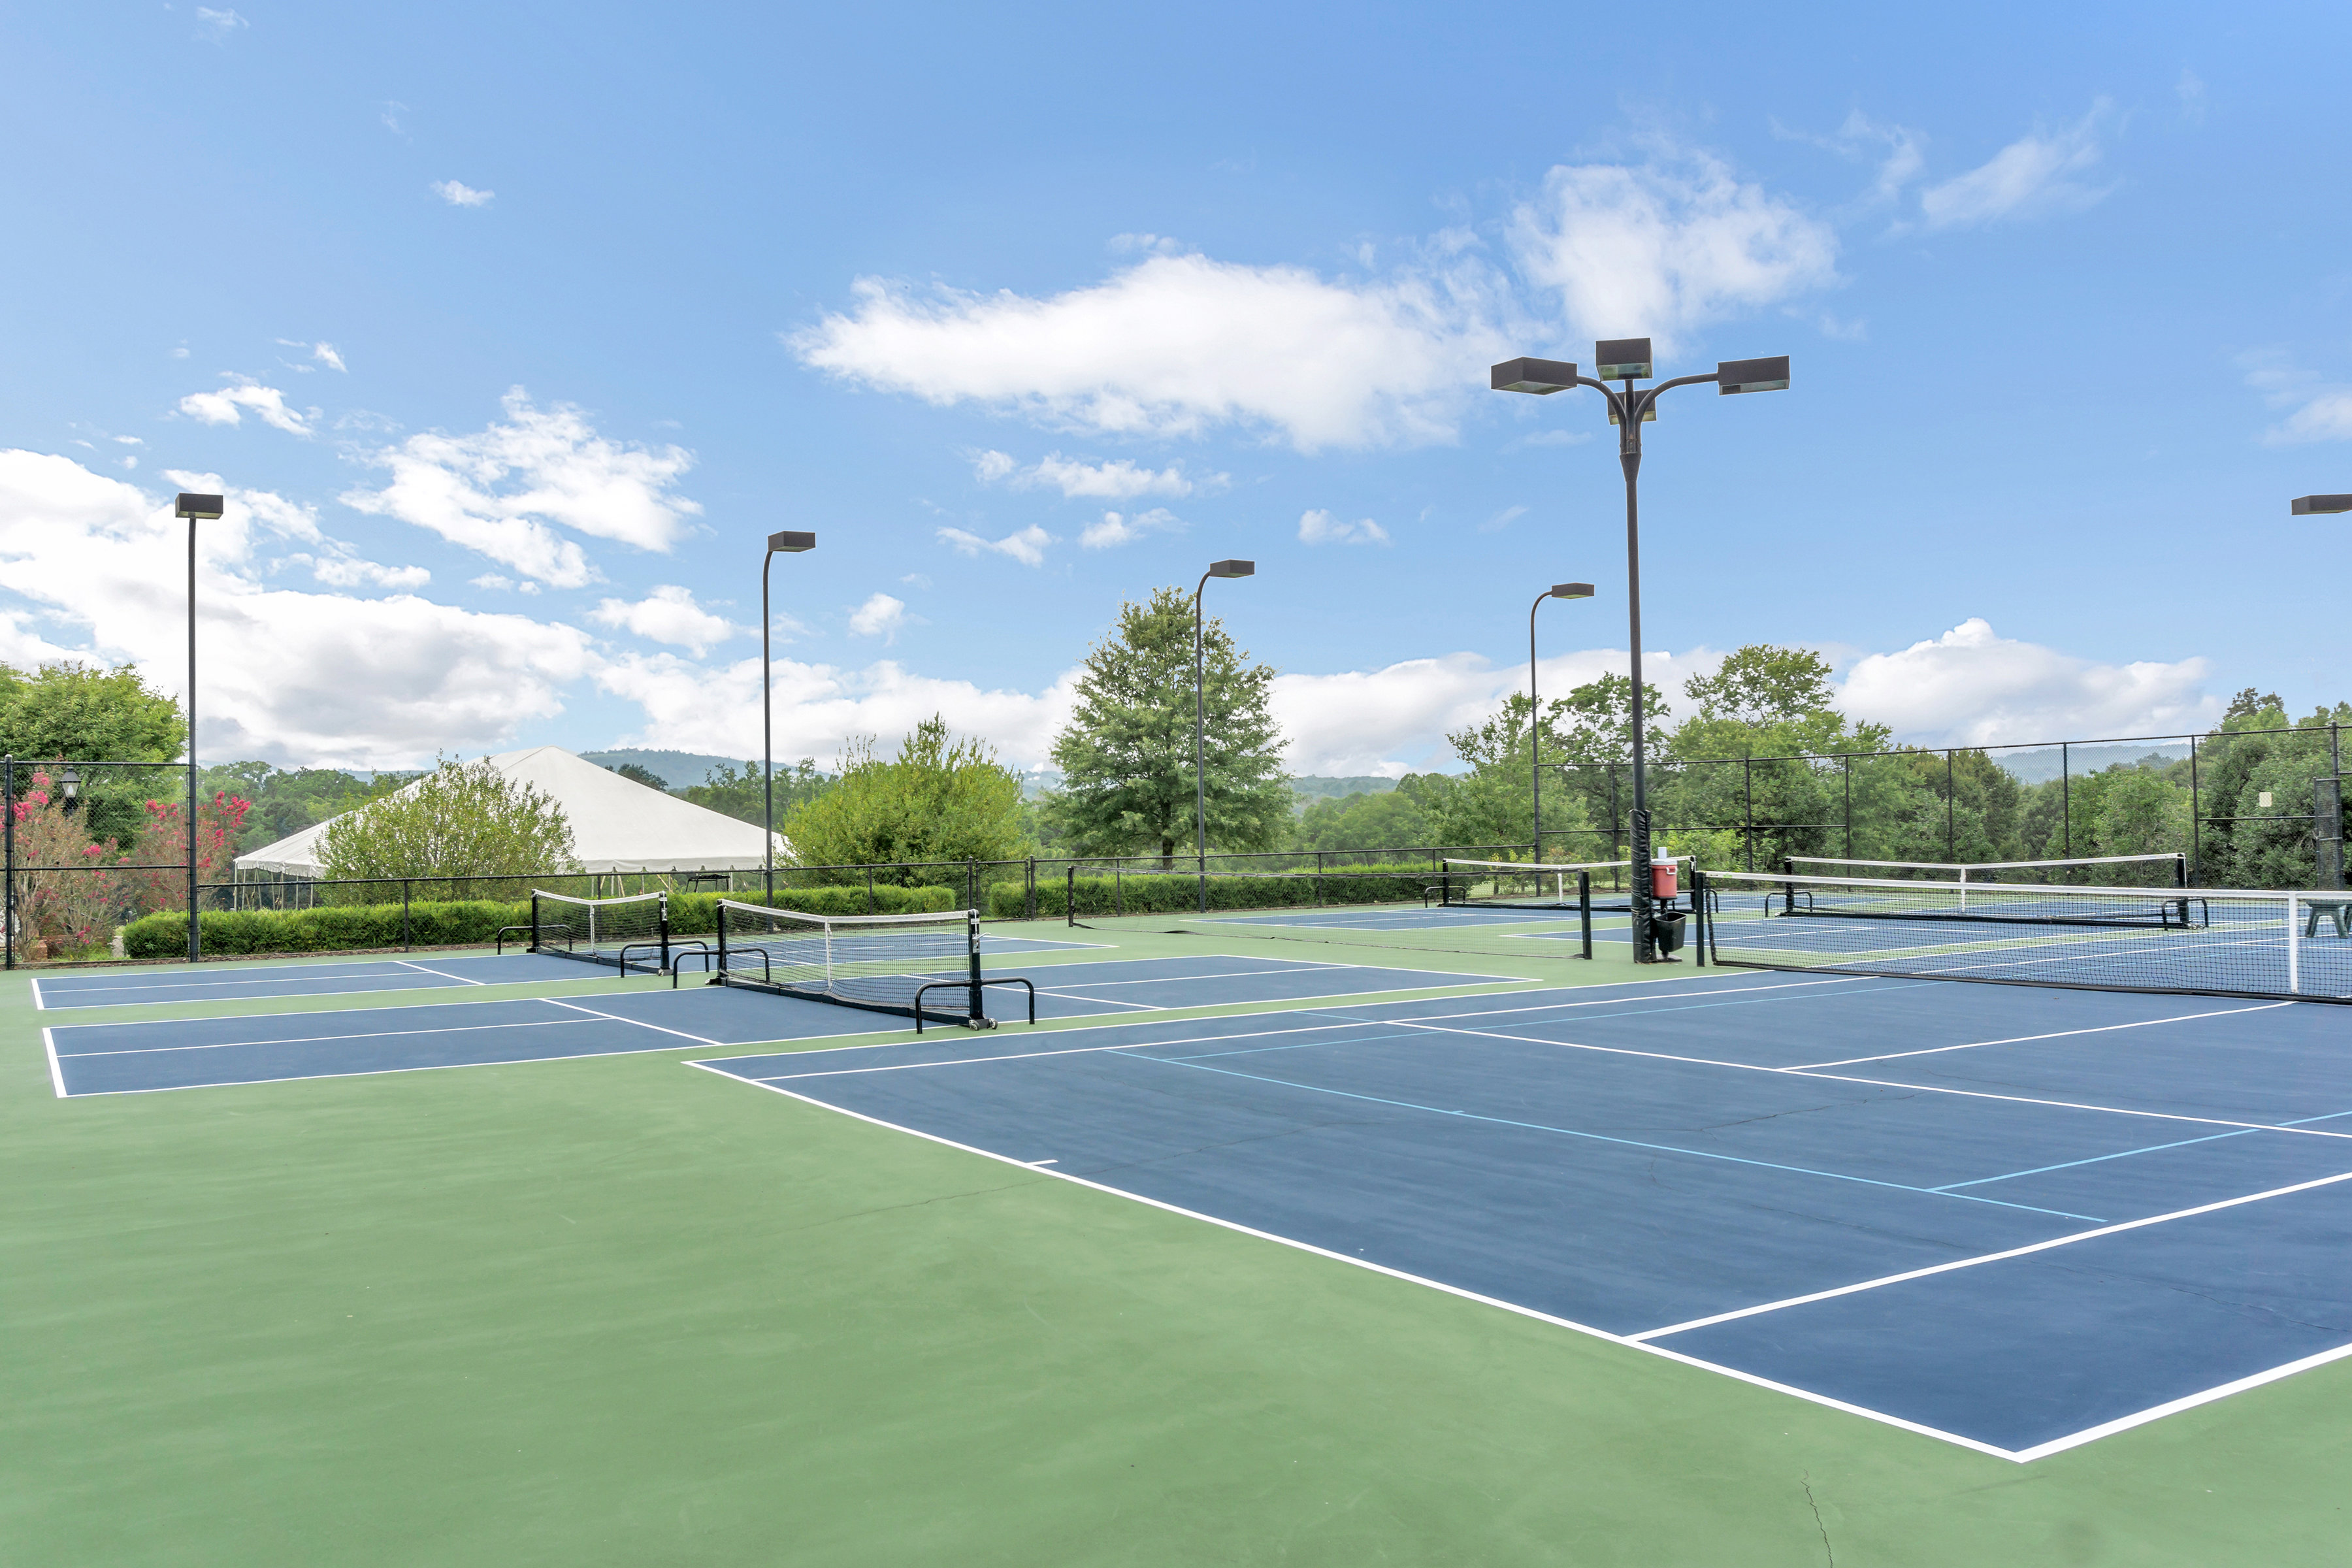 Glenmore lighted tennis courts.